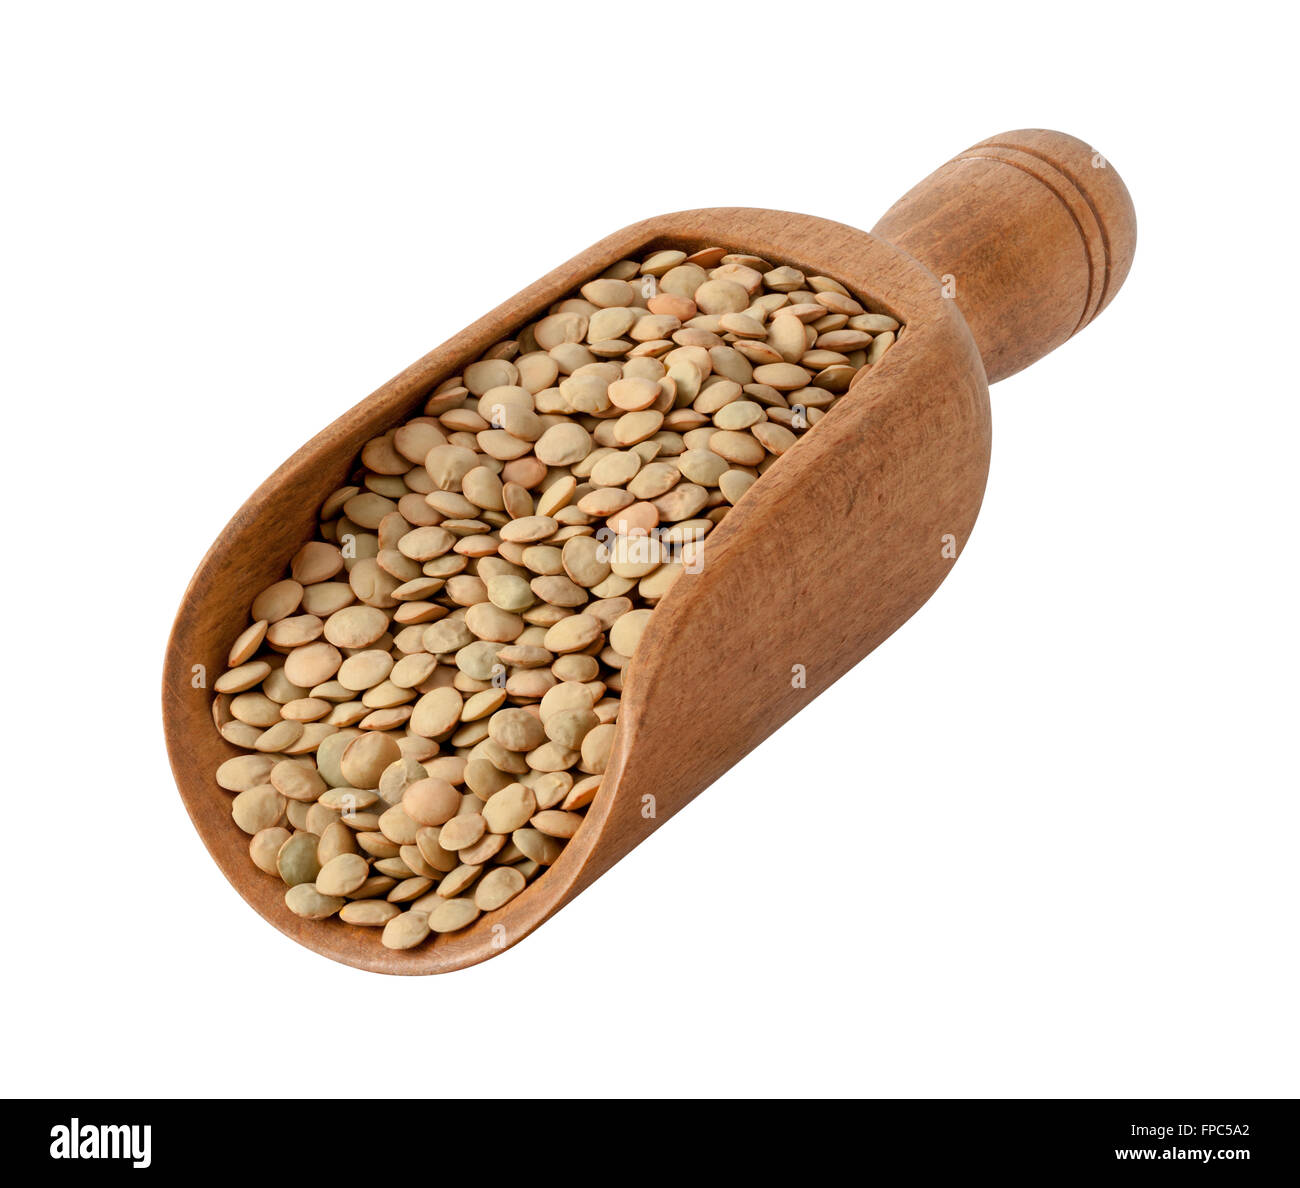 Lentils in a Wood Scoop. Full focus from front to  back. The image is a cut out, isolated on a white background. Stock Photo